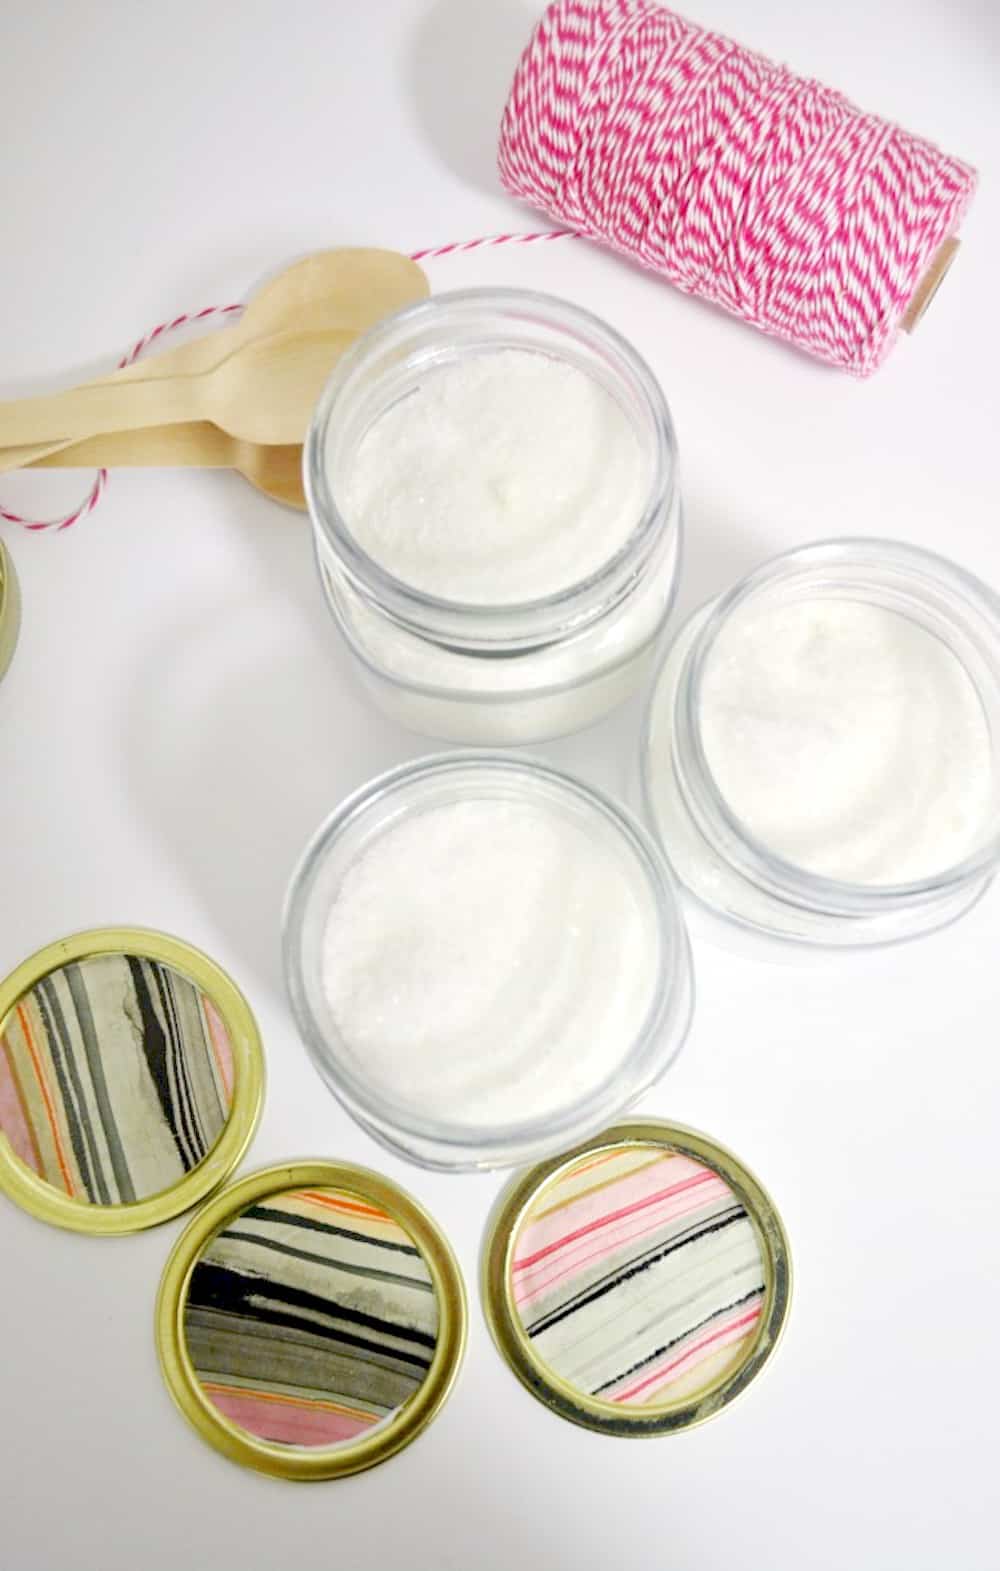 Bath salts in mason jars with baker's twine and wooden spoons